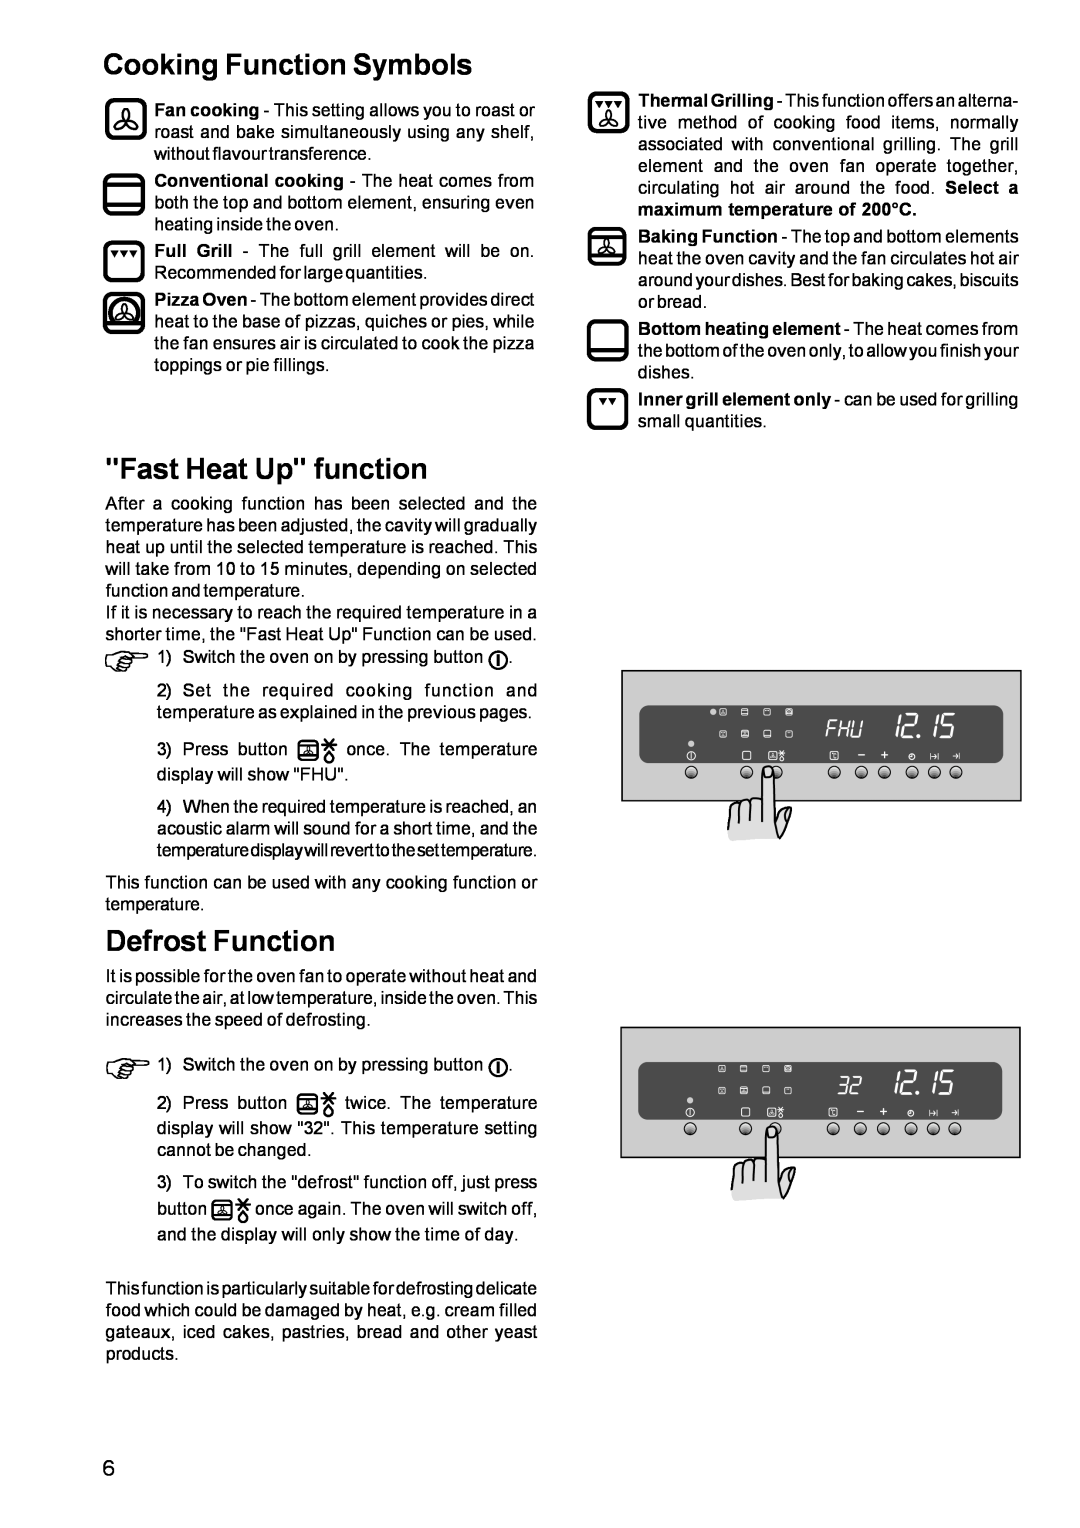 Zanussi ZBM 972 manual Cooking Function Symbols, Fast Heat Up function, Defrost Function 